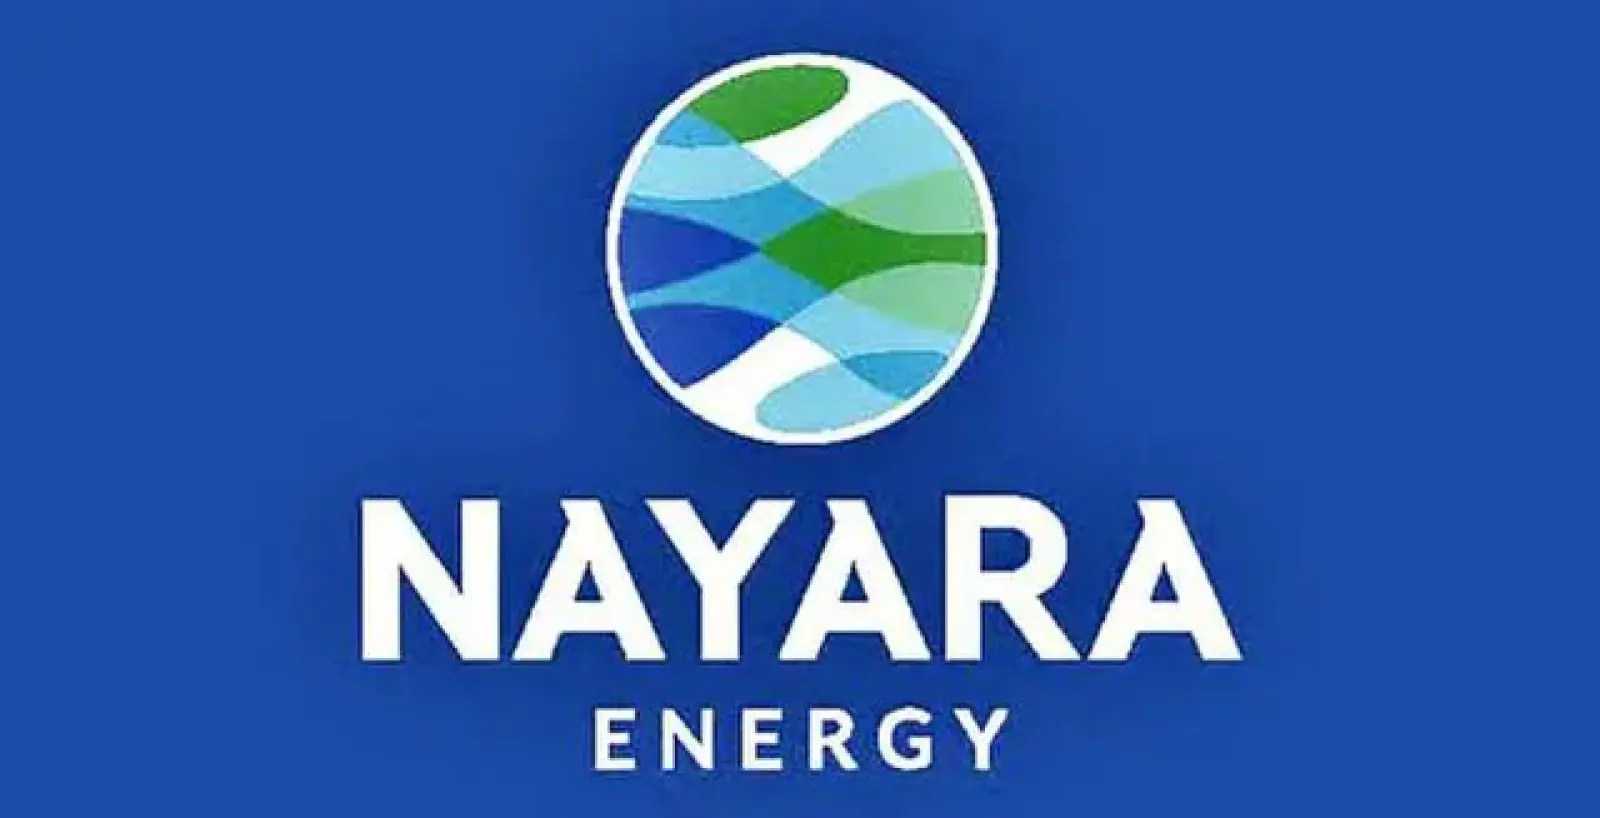 Nayara Energy's petrol sales increased by 48 percent in January-March, exports decreased